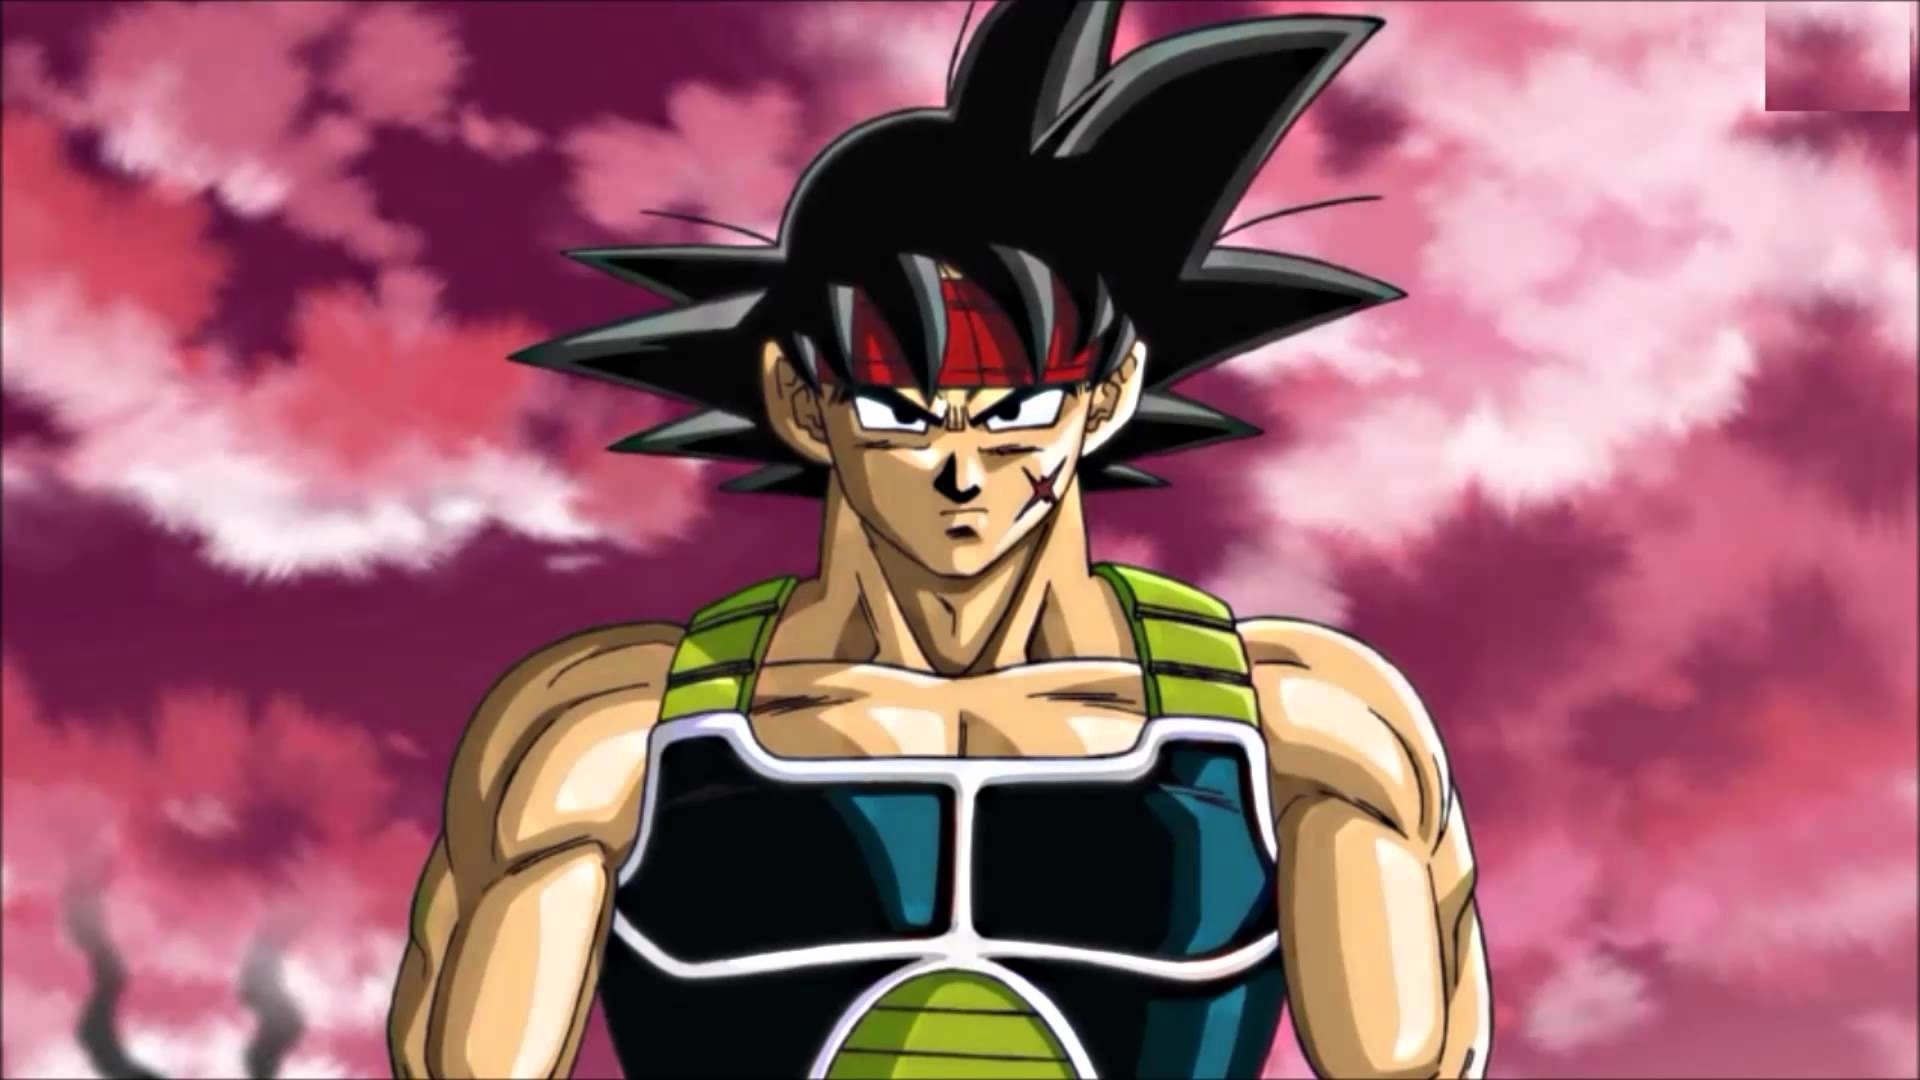 1920x1080 Bardock - Dragon Ball Z Soundtrack Solid State Scouter